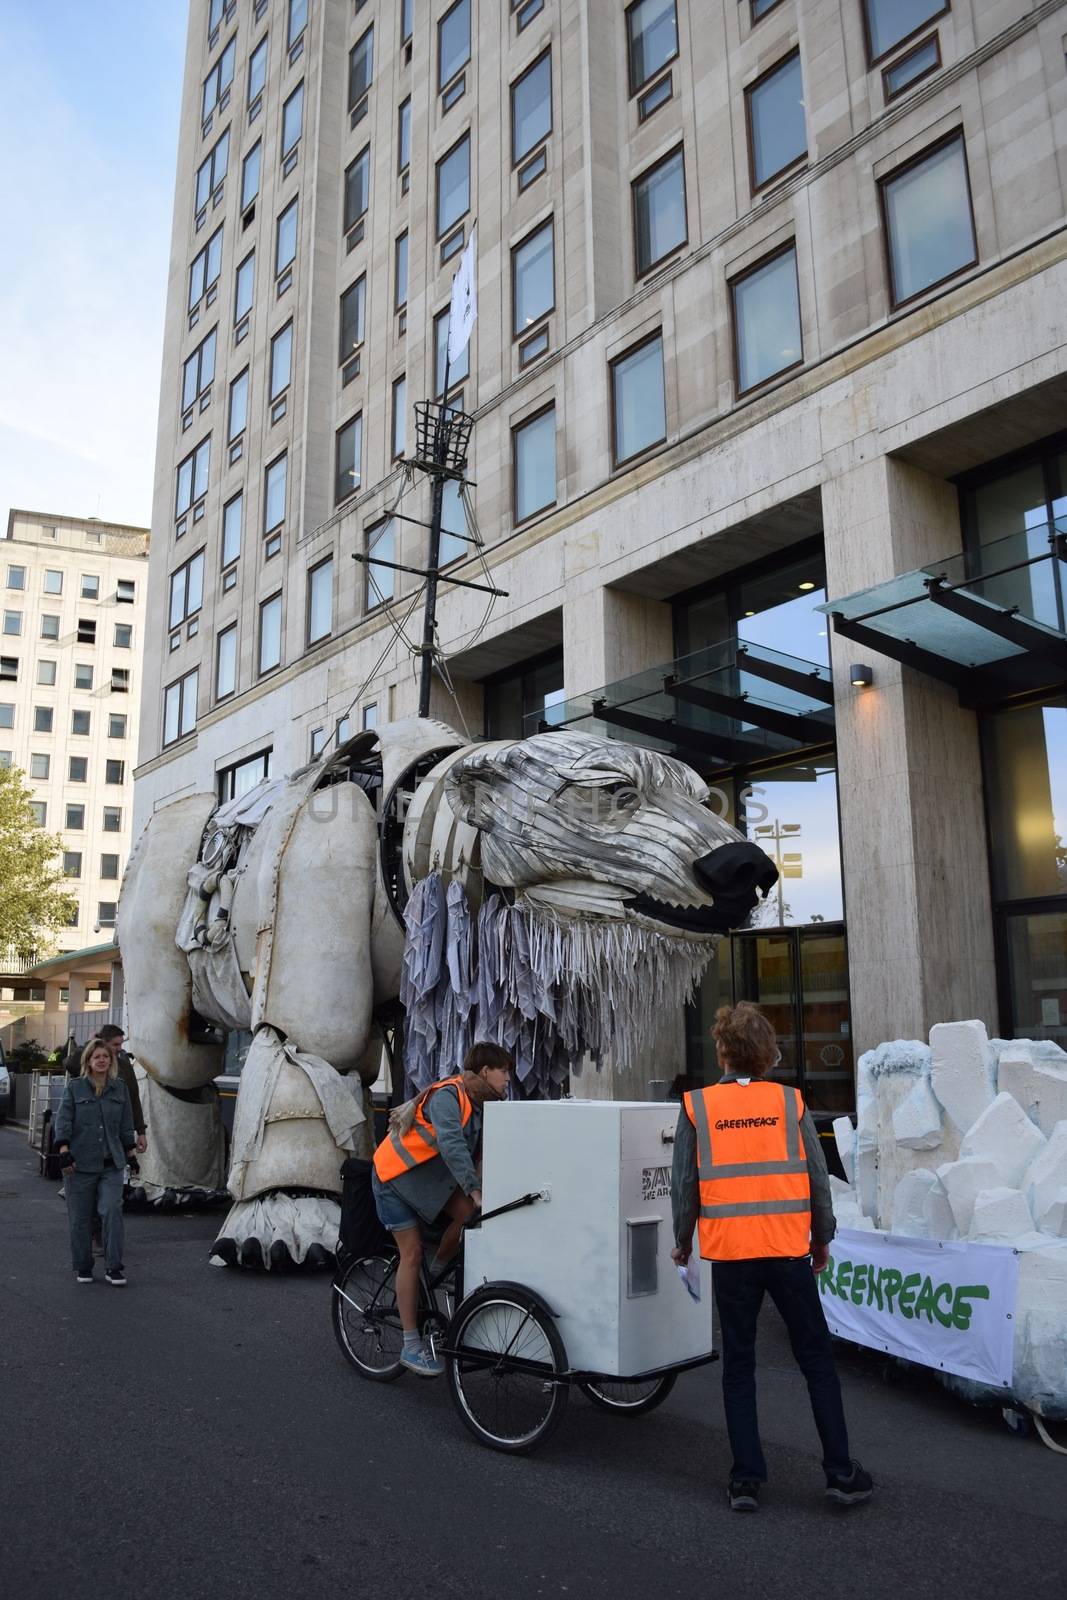 UNITED KINGDOM, London: Aurora the polar bear outside Shell HQ	Actress Emma Thompson joined John Sauven, director of Greenpeace, and a number of activists and other members of the public outside Shell's Headquarters in London on September 29, 2015 to celebrate the announcement that Shell had abandoned its plans to drill for oil in the Arctic.  	According to our contributor about 50 to 100 people listened as Sauven and Thompson spoke of the victory and their continuing fight, which would see their puppet polar bear Aurora being relocated to Paris. 